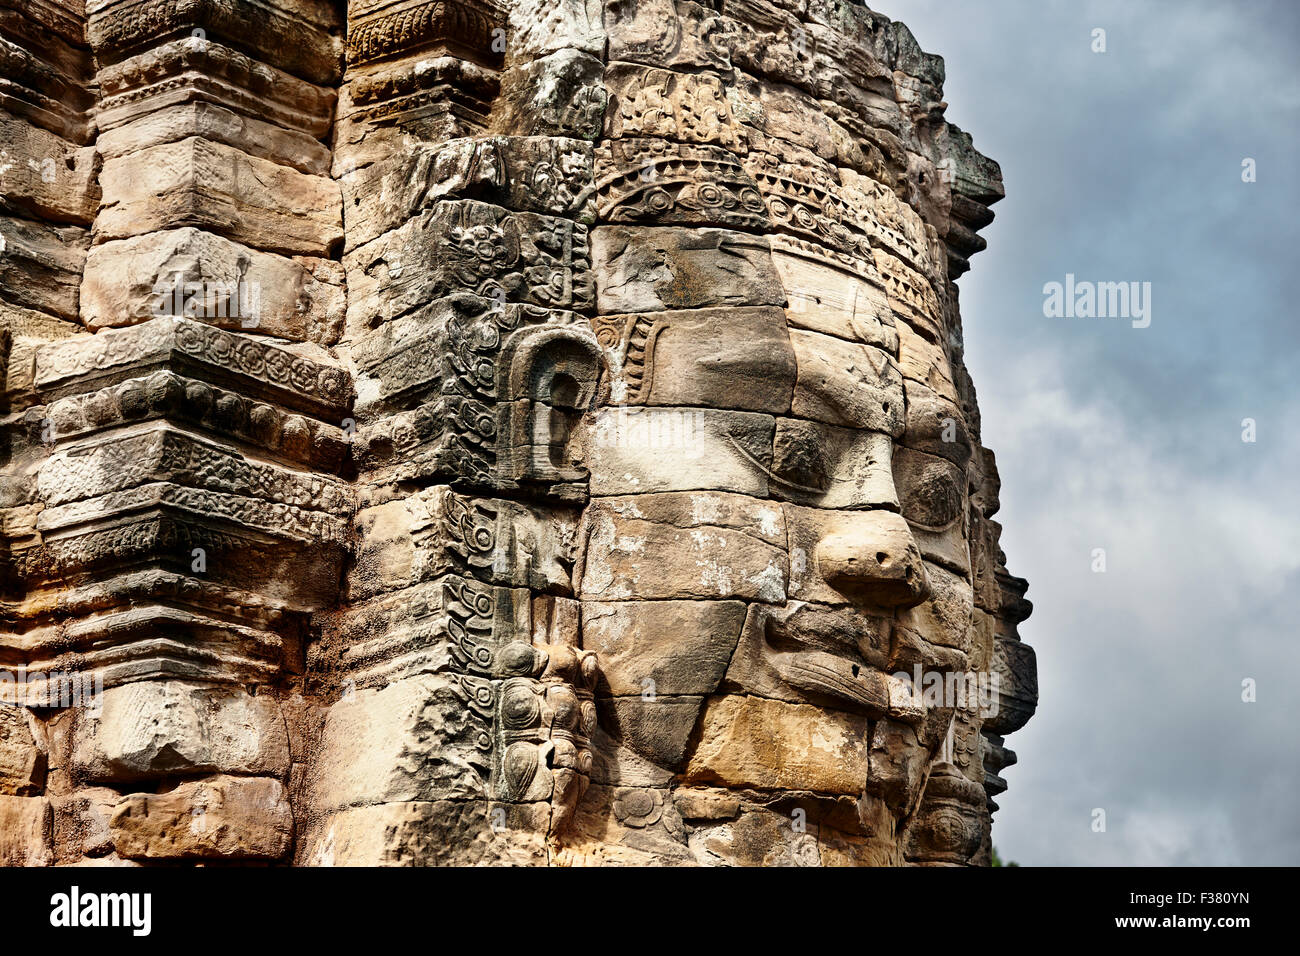 Giant stone carved face at the ancient Bayon temple. Angkor Archaeological Park, Siem Reap Province, Cambodia. Stock Photo